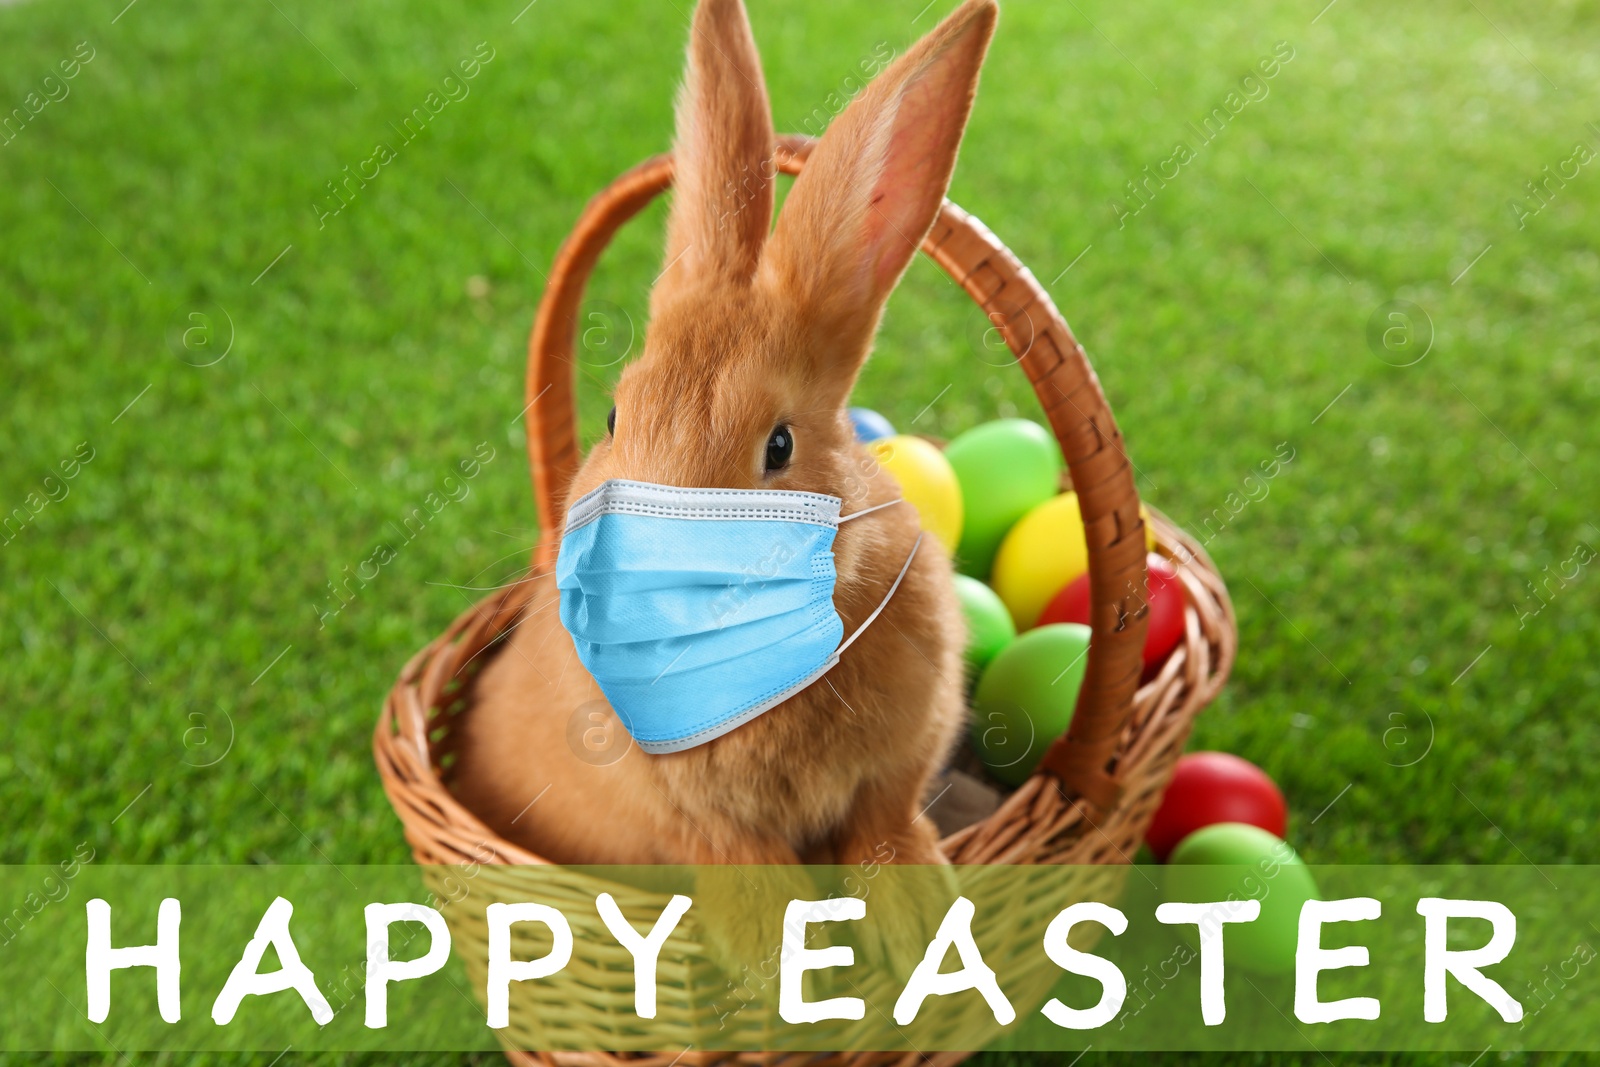 Image of Text Happy Easter and cute bunny in protective mask on green grass. Holiday during Covid-19 pandemic